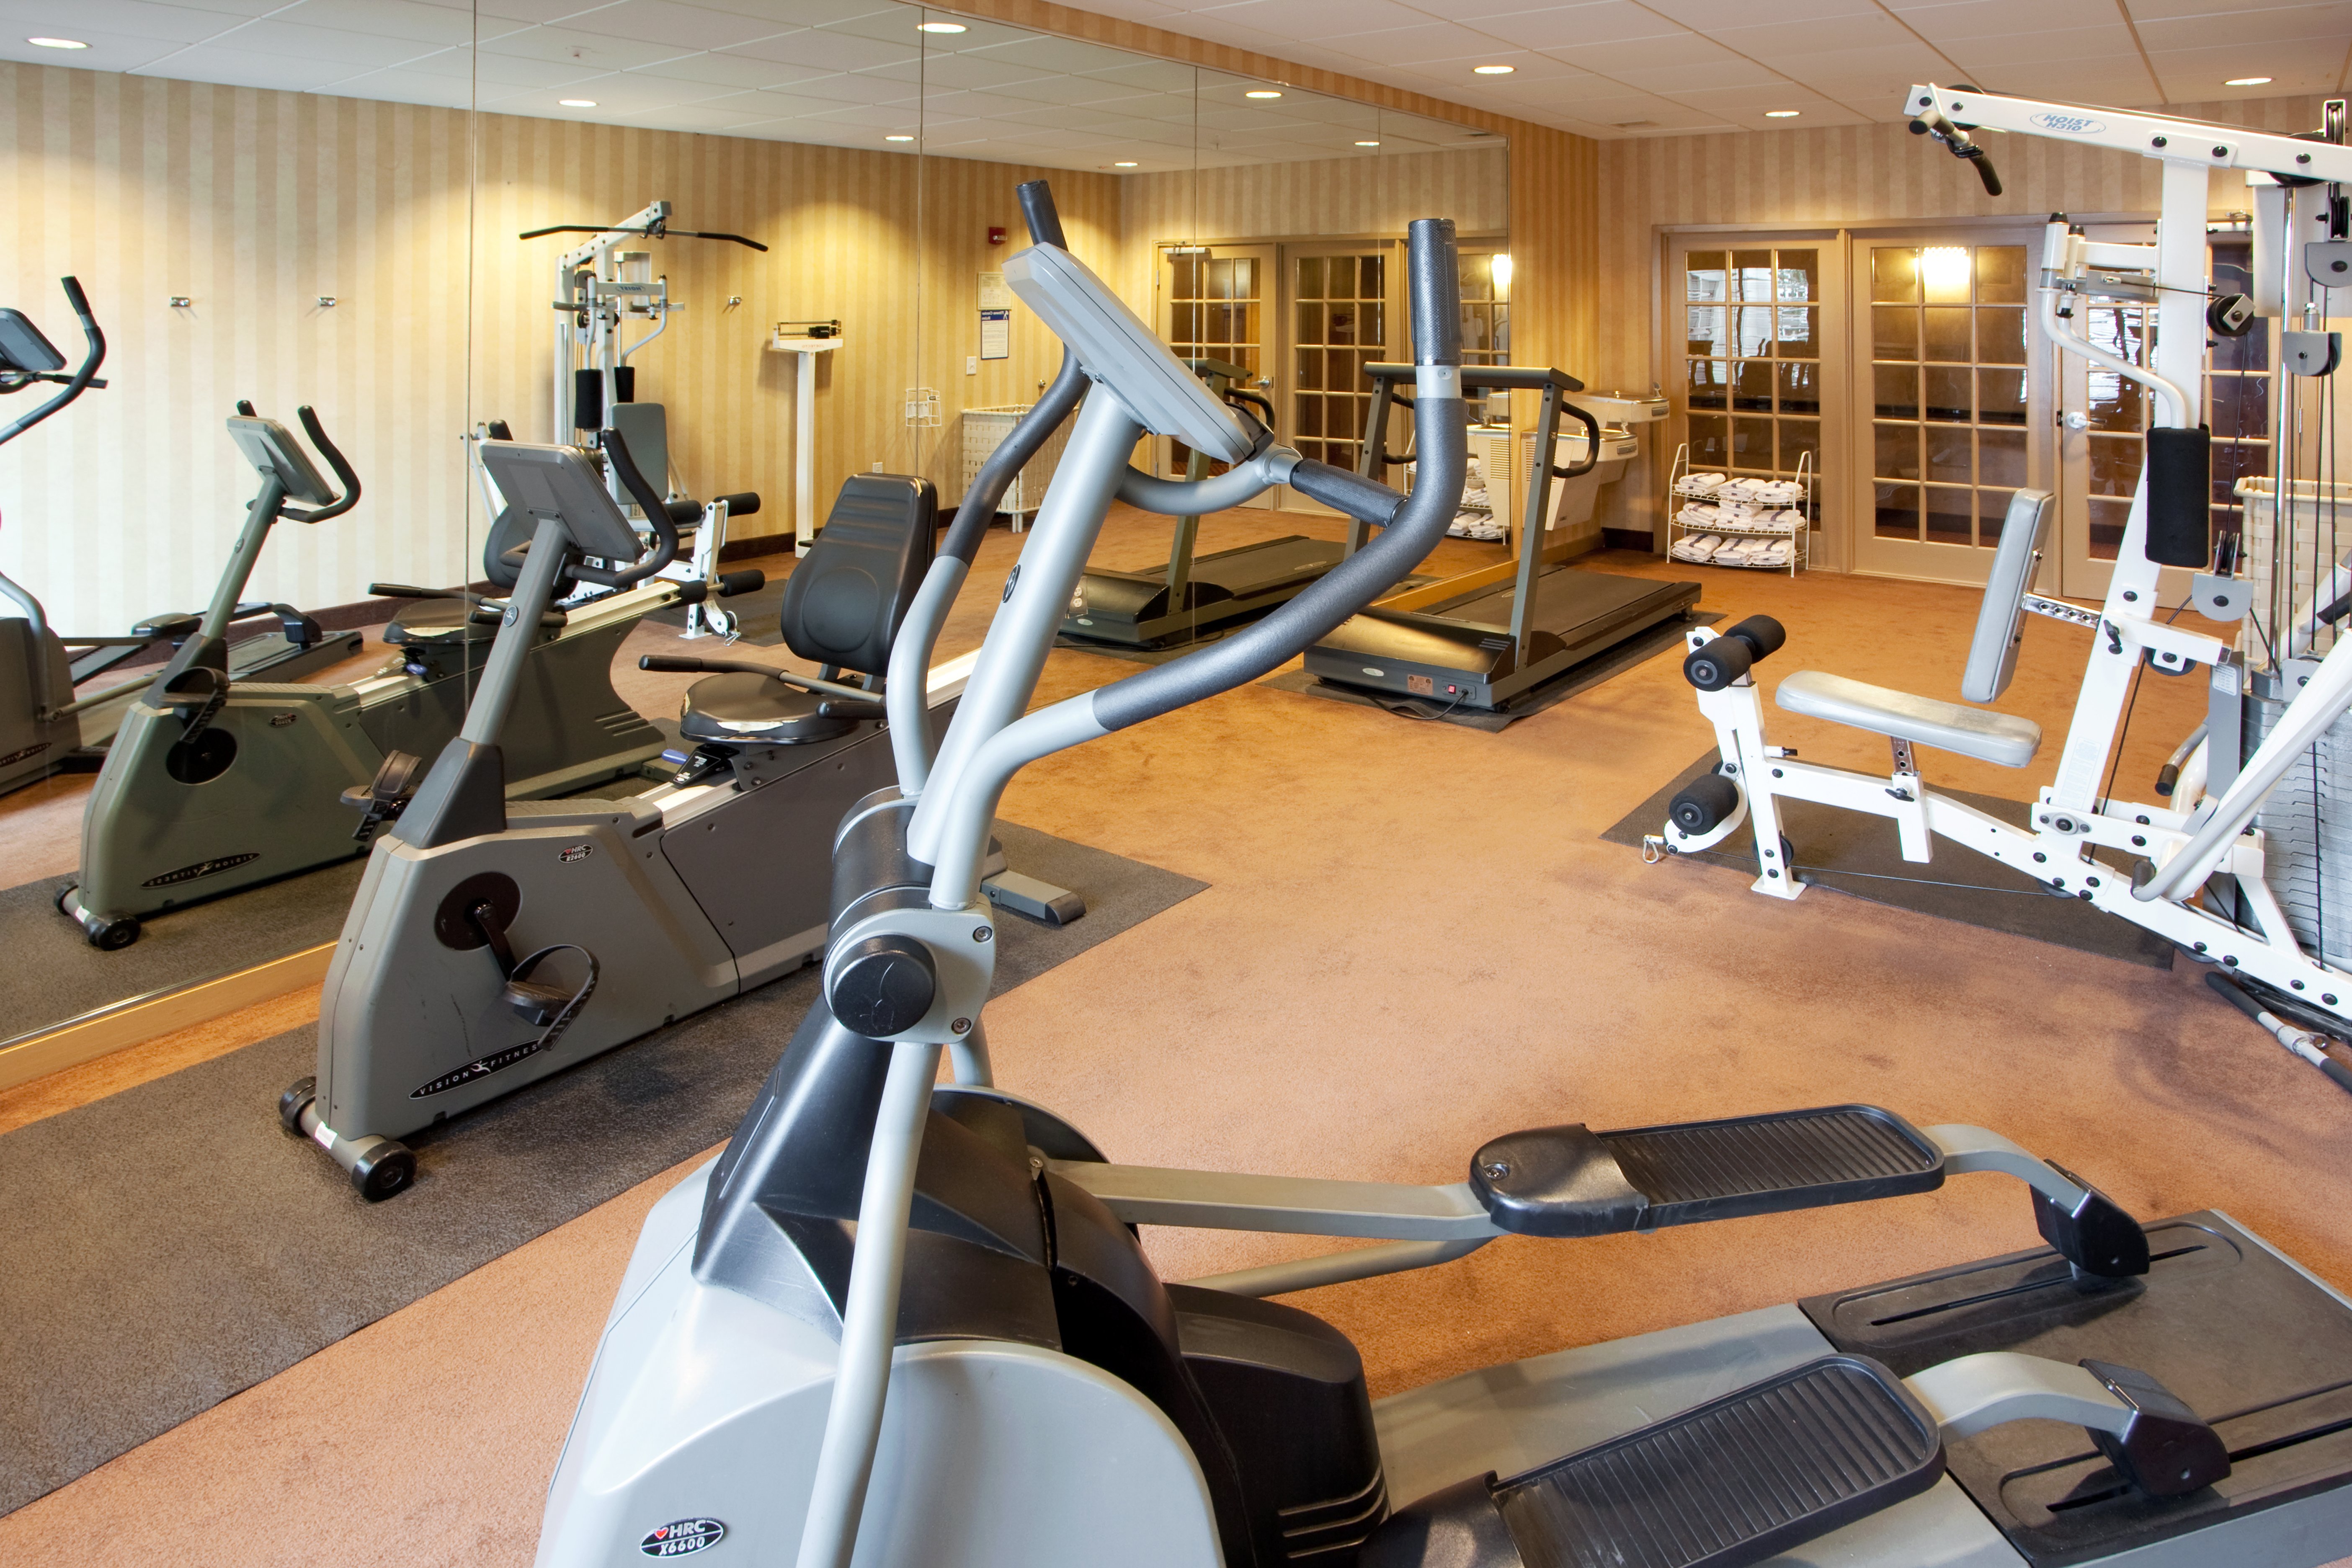 Fitness Center in our Hagerstown hotel near I-81